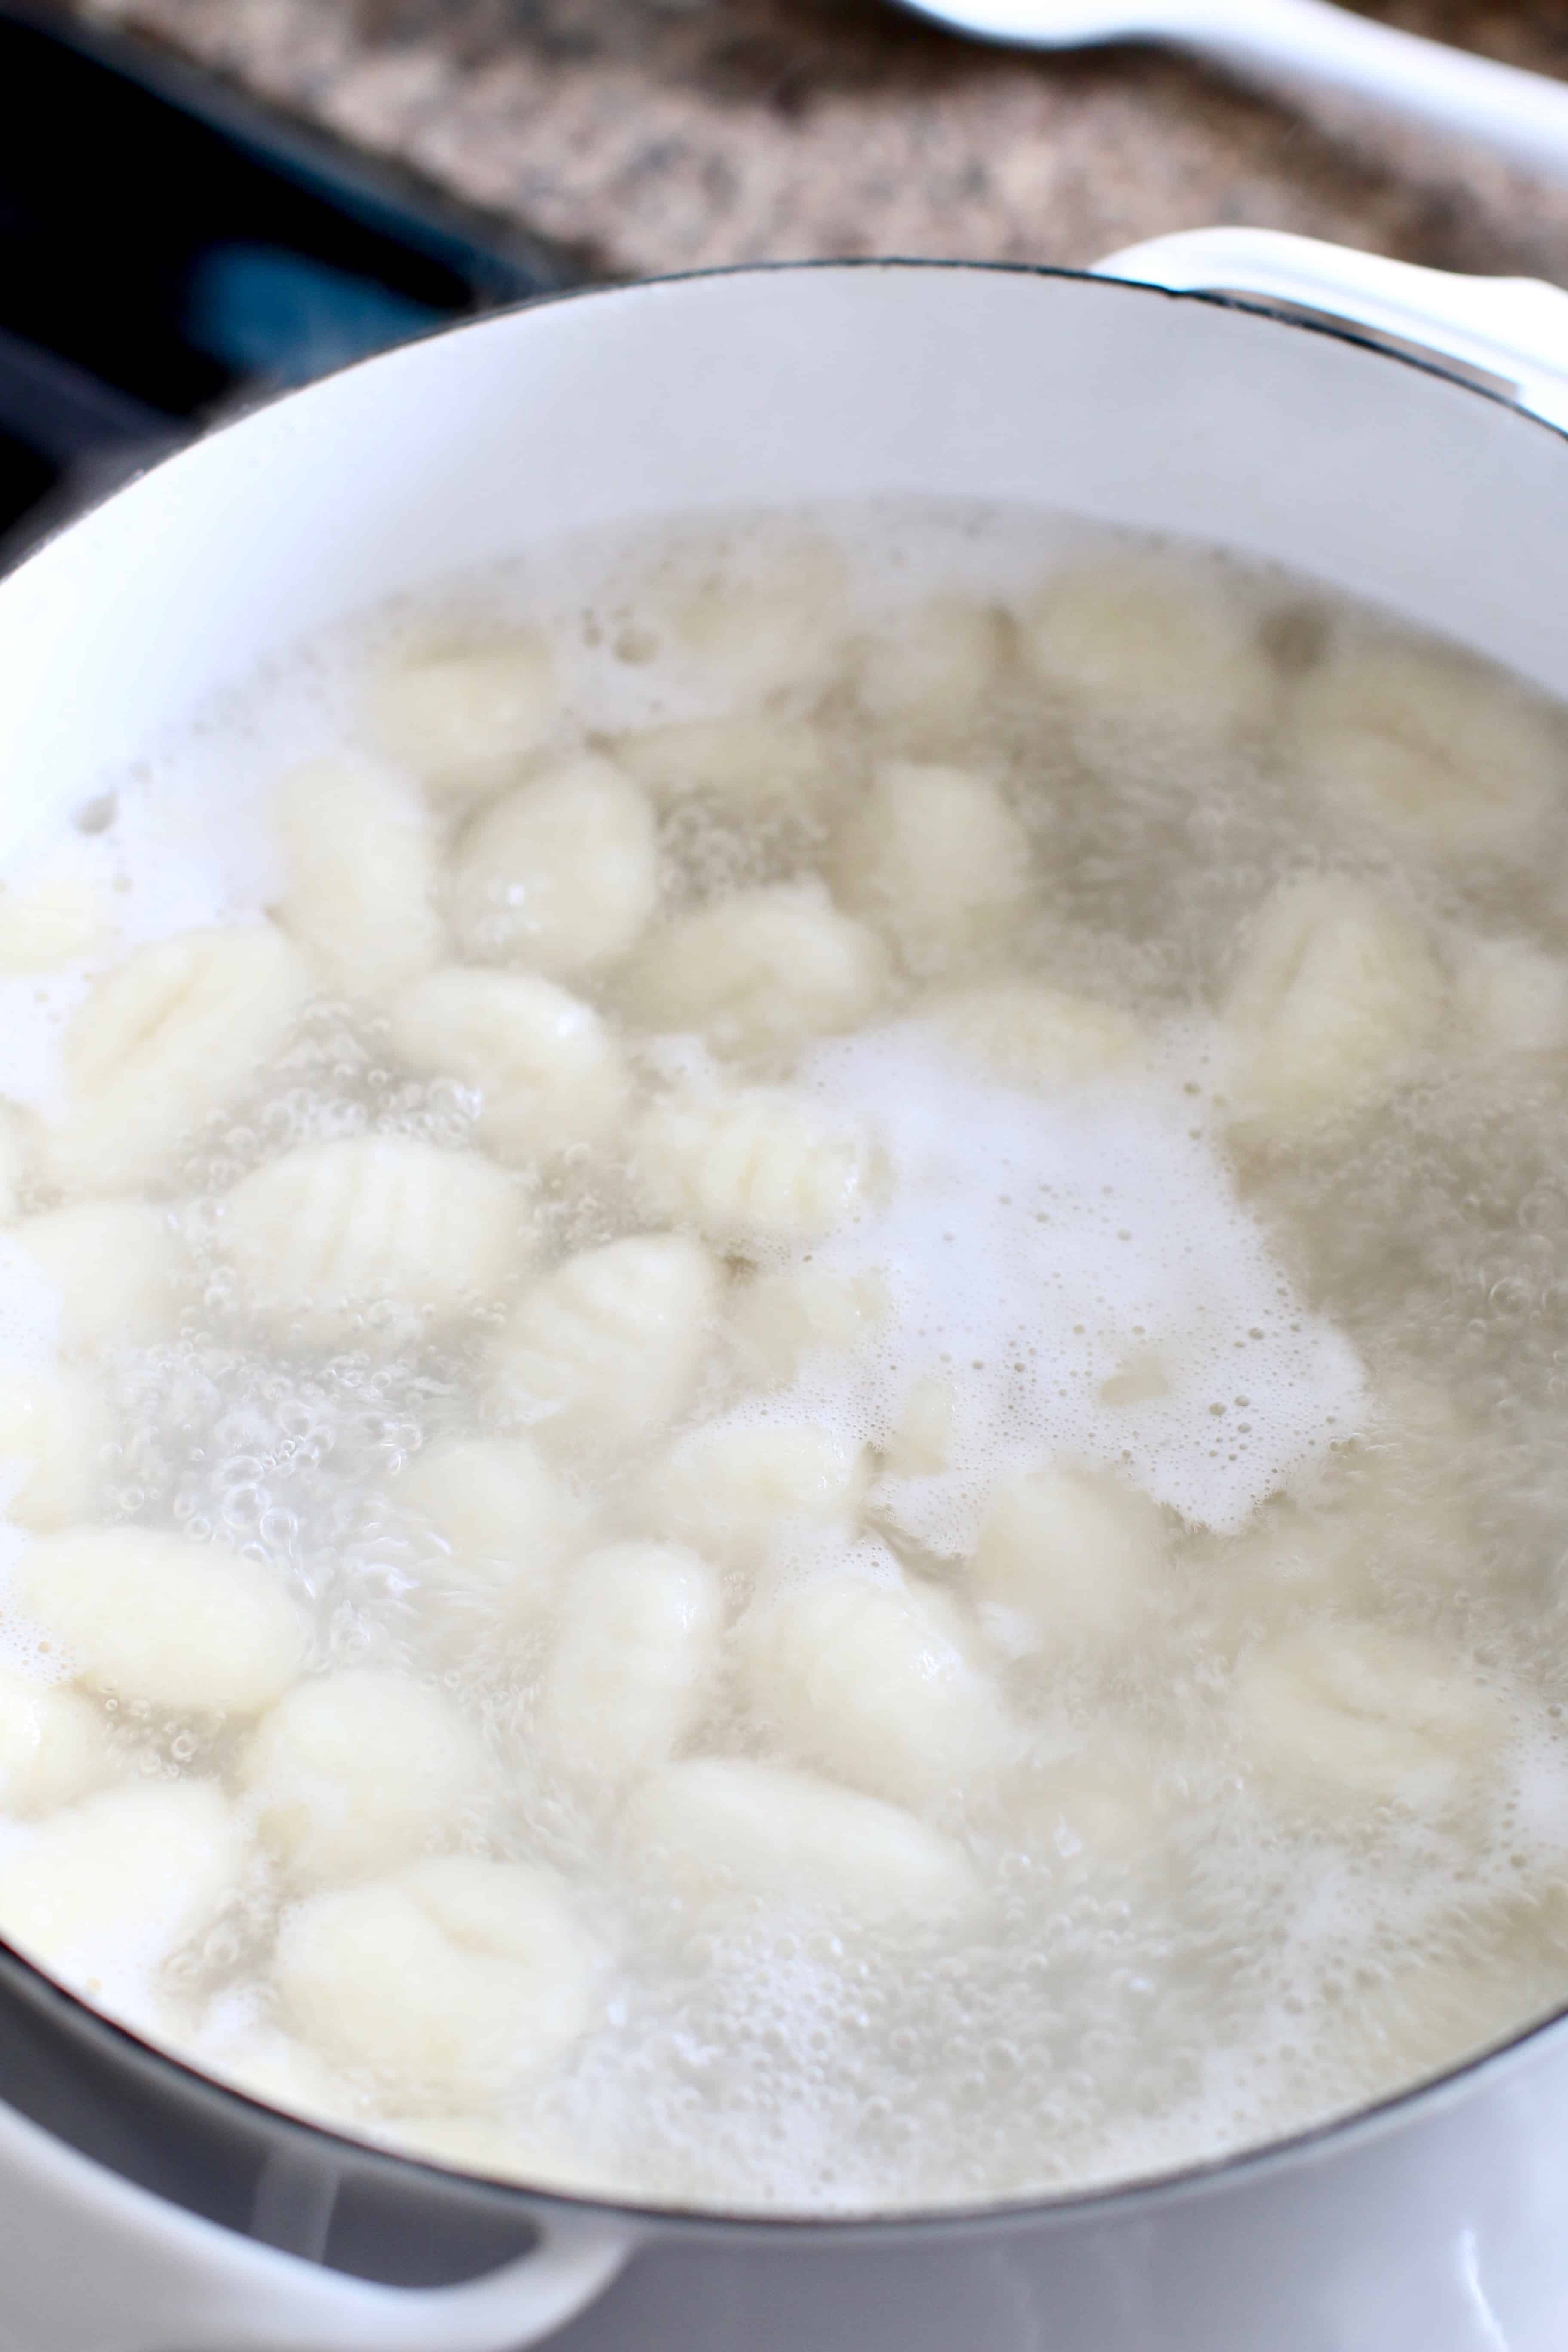 gnocchi boiling in water in a white pot.